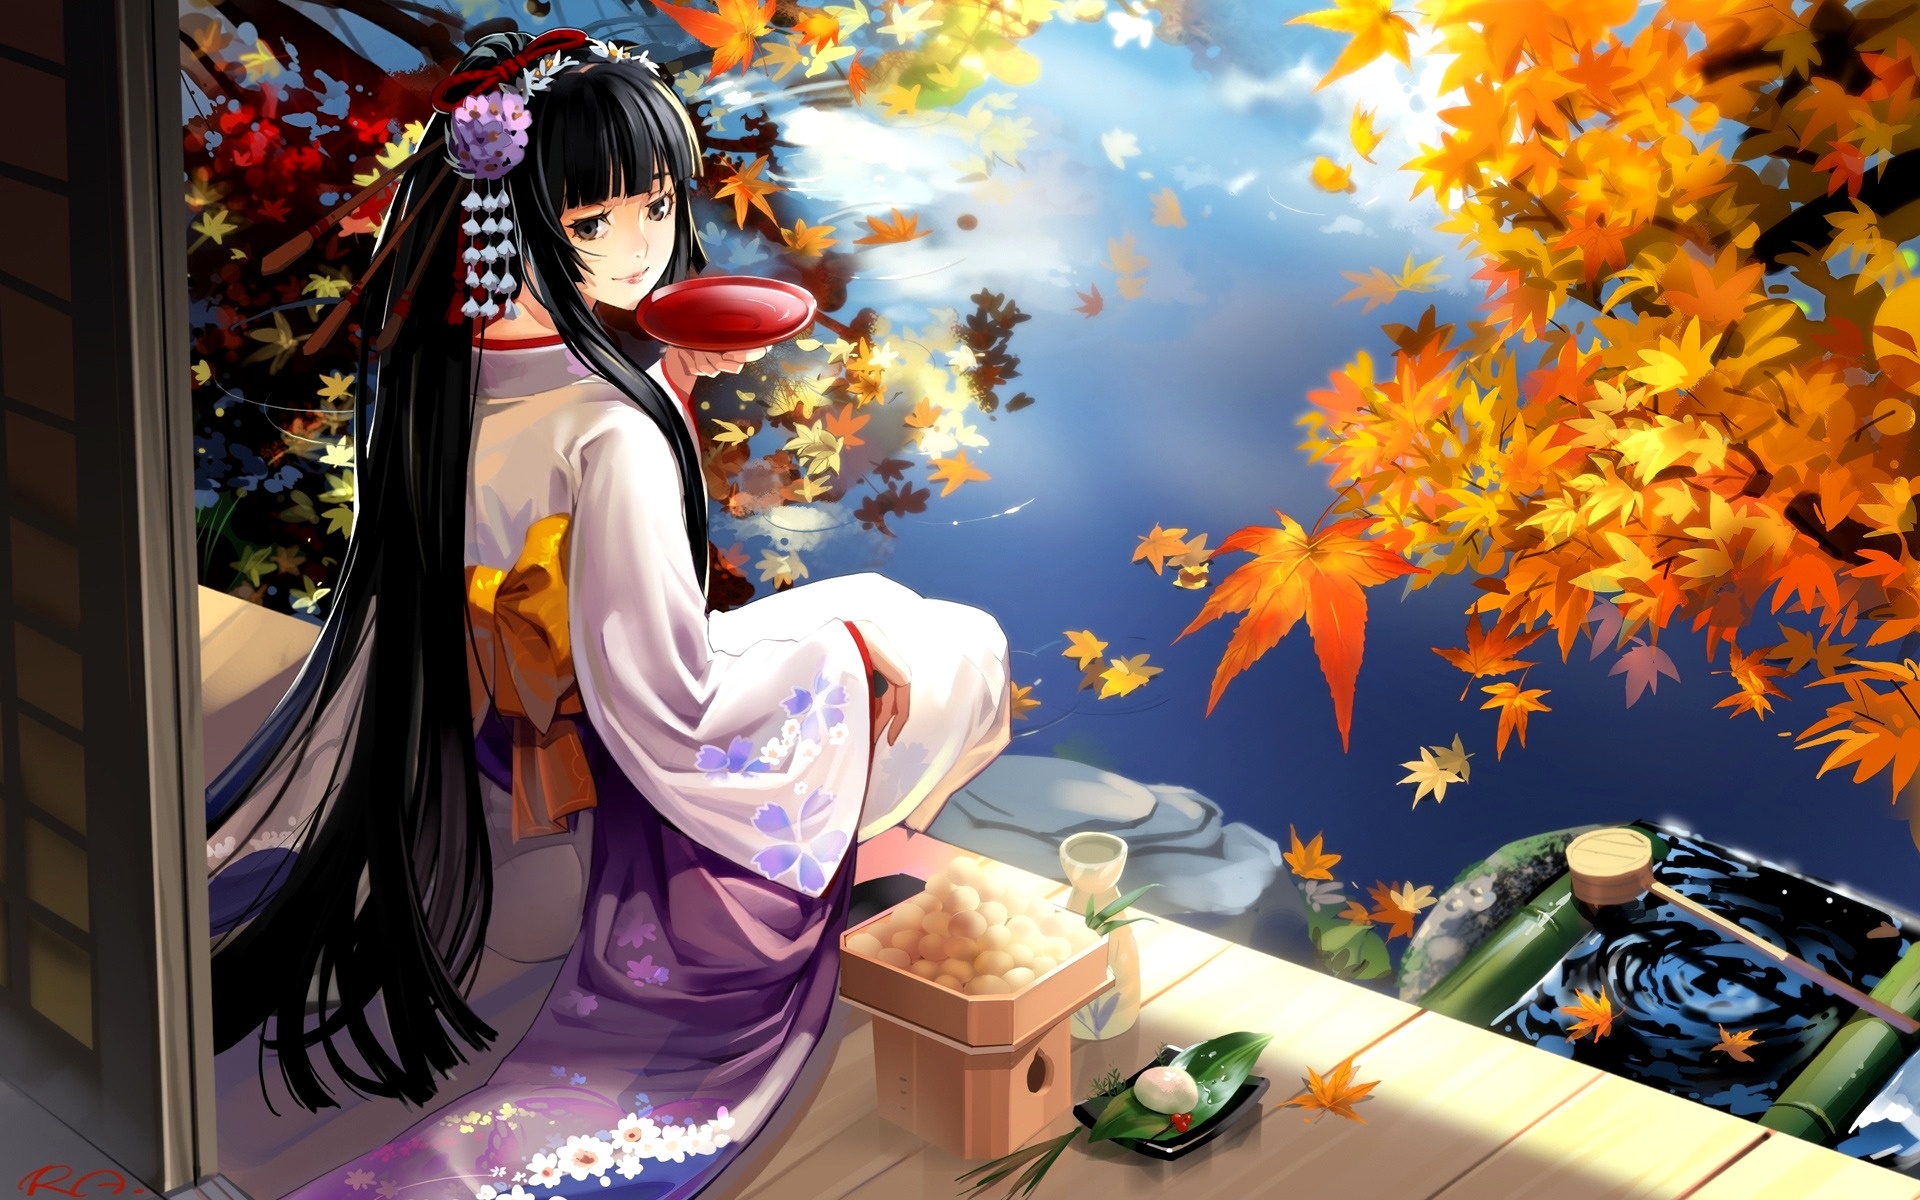 Anime Wallpaper For PC 10 photos of Anime wallpaper for PC as your ...